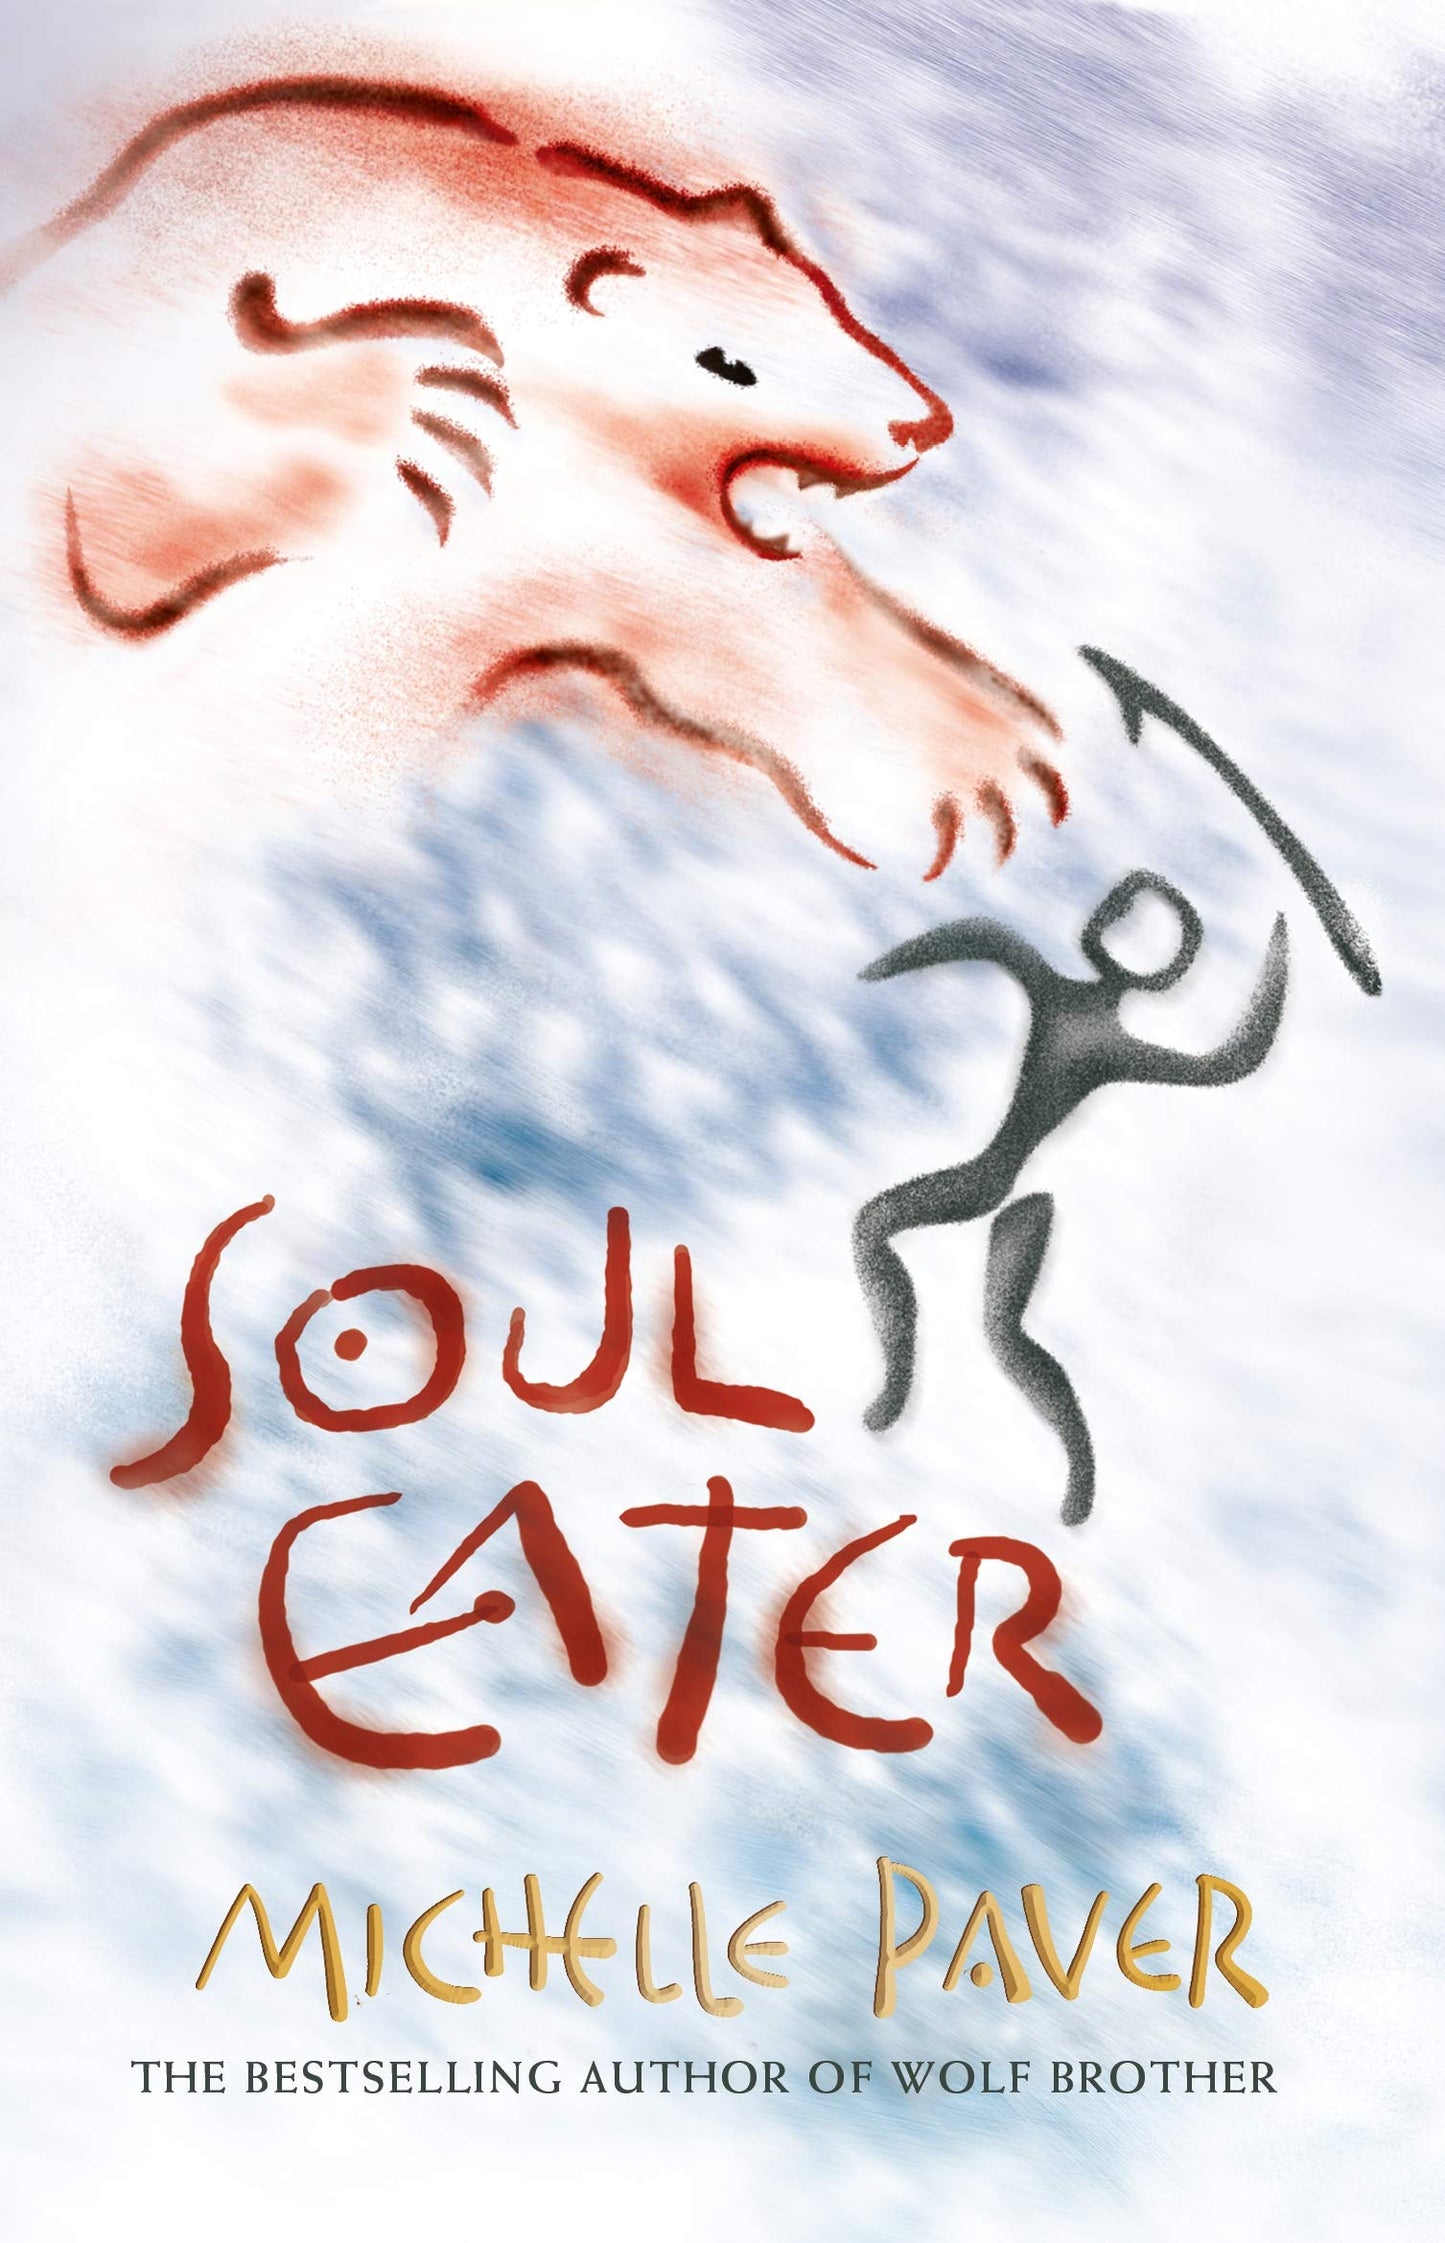 Soul Eater by Michelle Paver